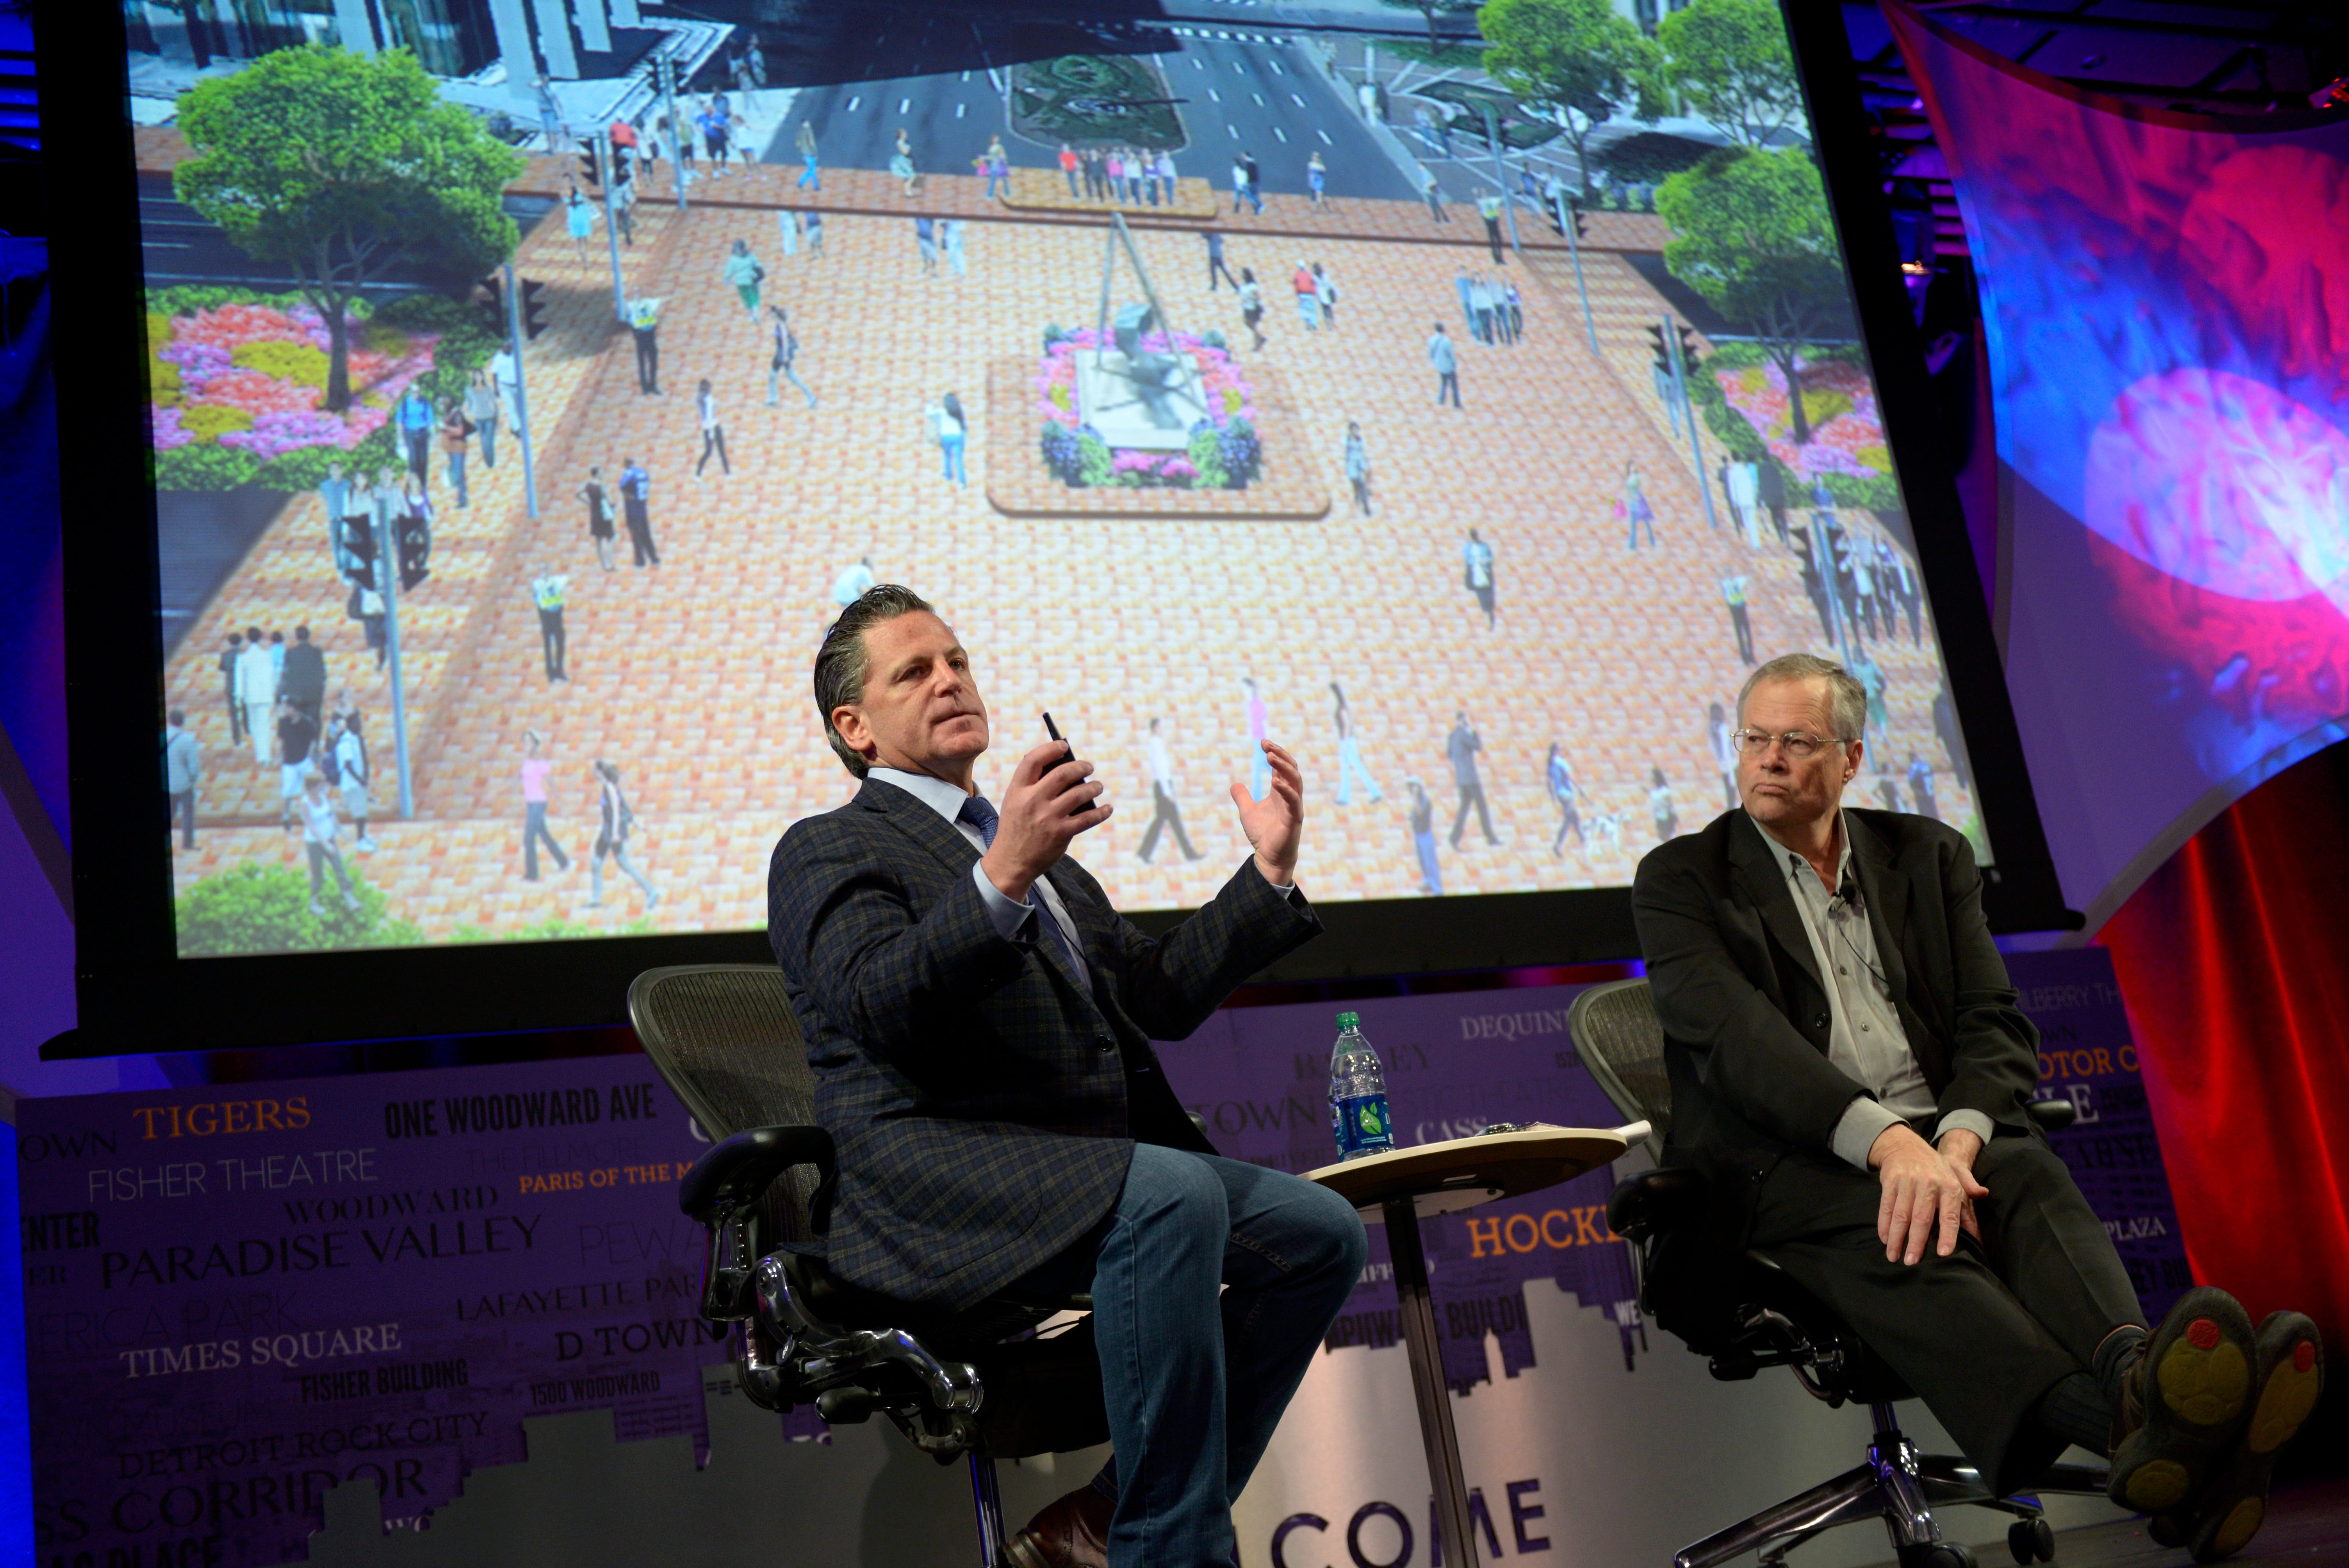 Dan Gilbert, chairman and founder of Quicken Loans Inc., left, and Fred Kent, President of the Project for Public Spaces, talk about proposed improvements to downtown Detroit, including this mock-up of the intersection of Woodward and Jefferson, at the City Theatre in Detroit, March 28, 2013.